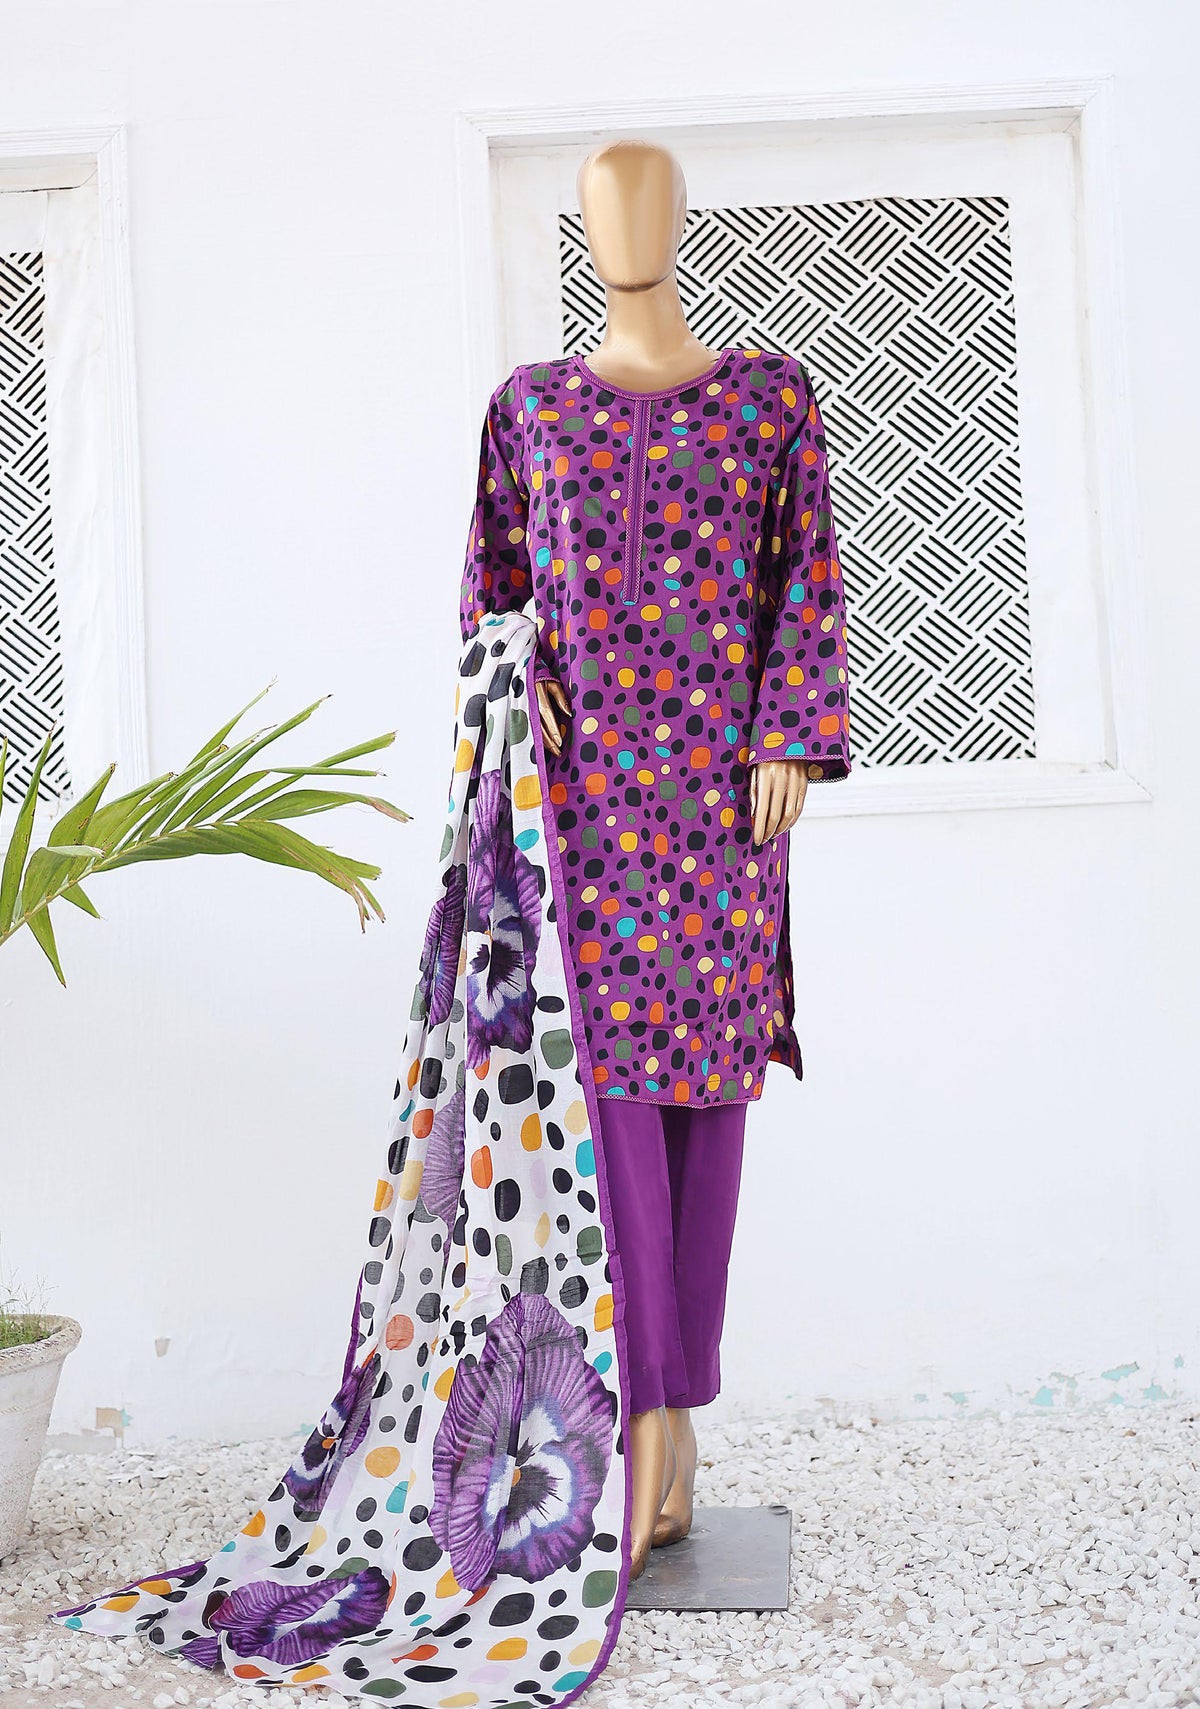 Bin Saeed Printed Lawn Coll"24-3Piece Stitched D-12